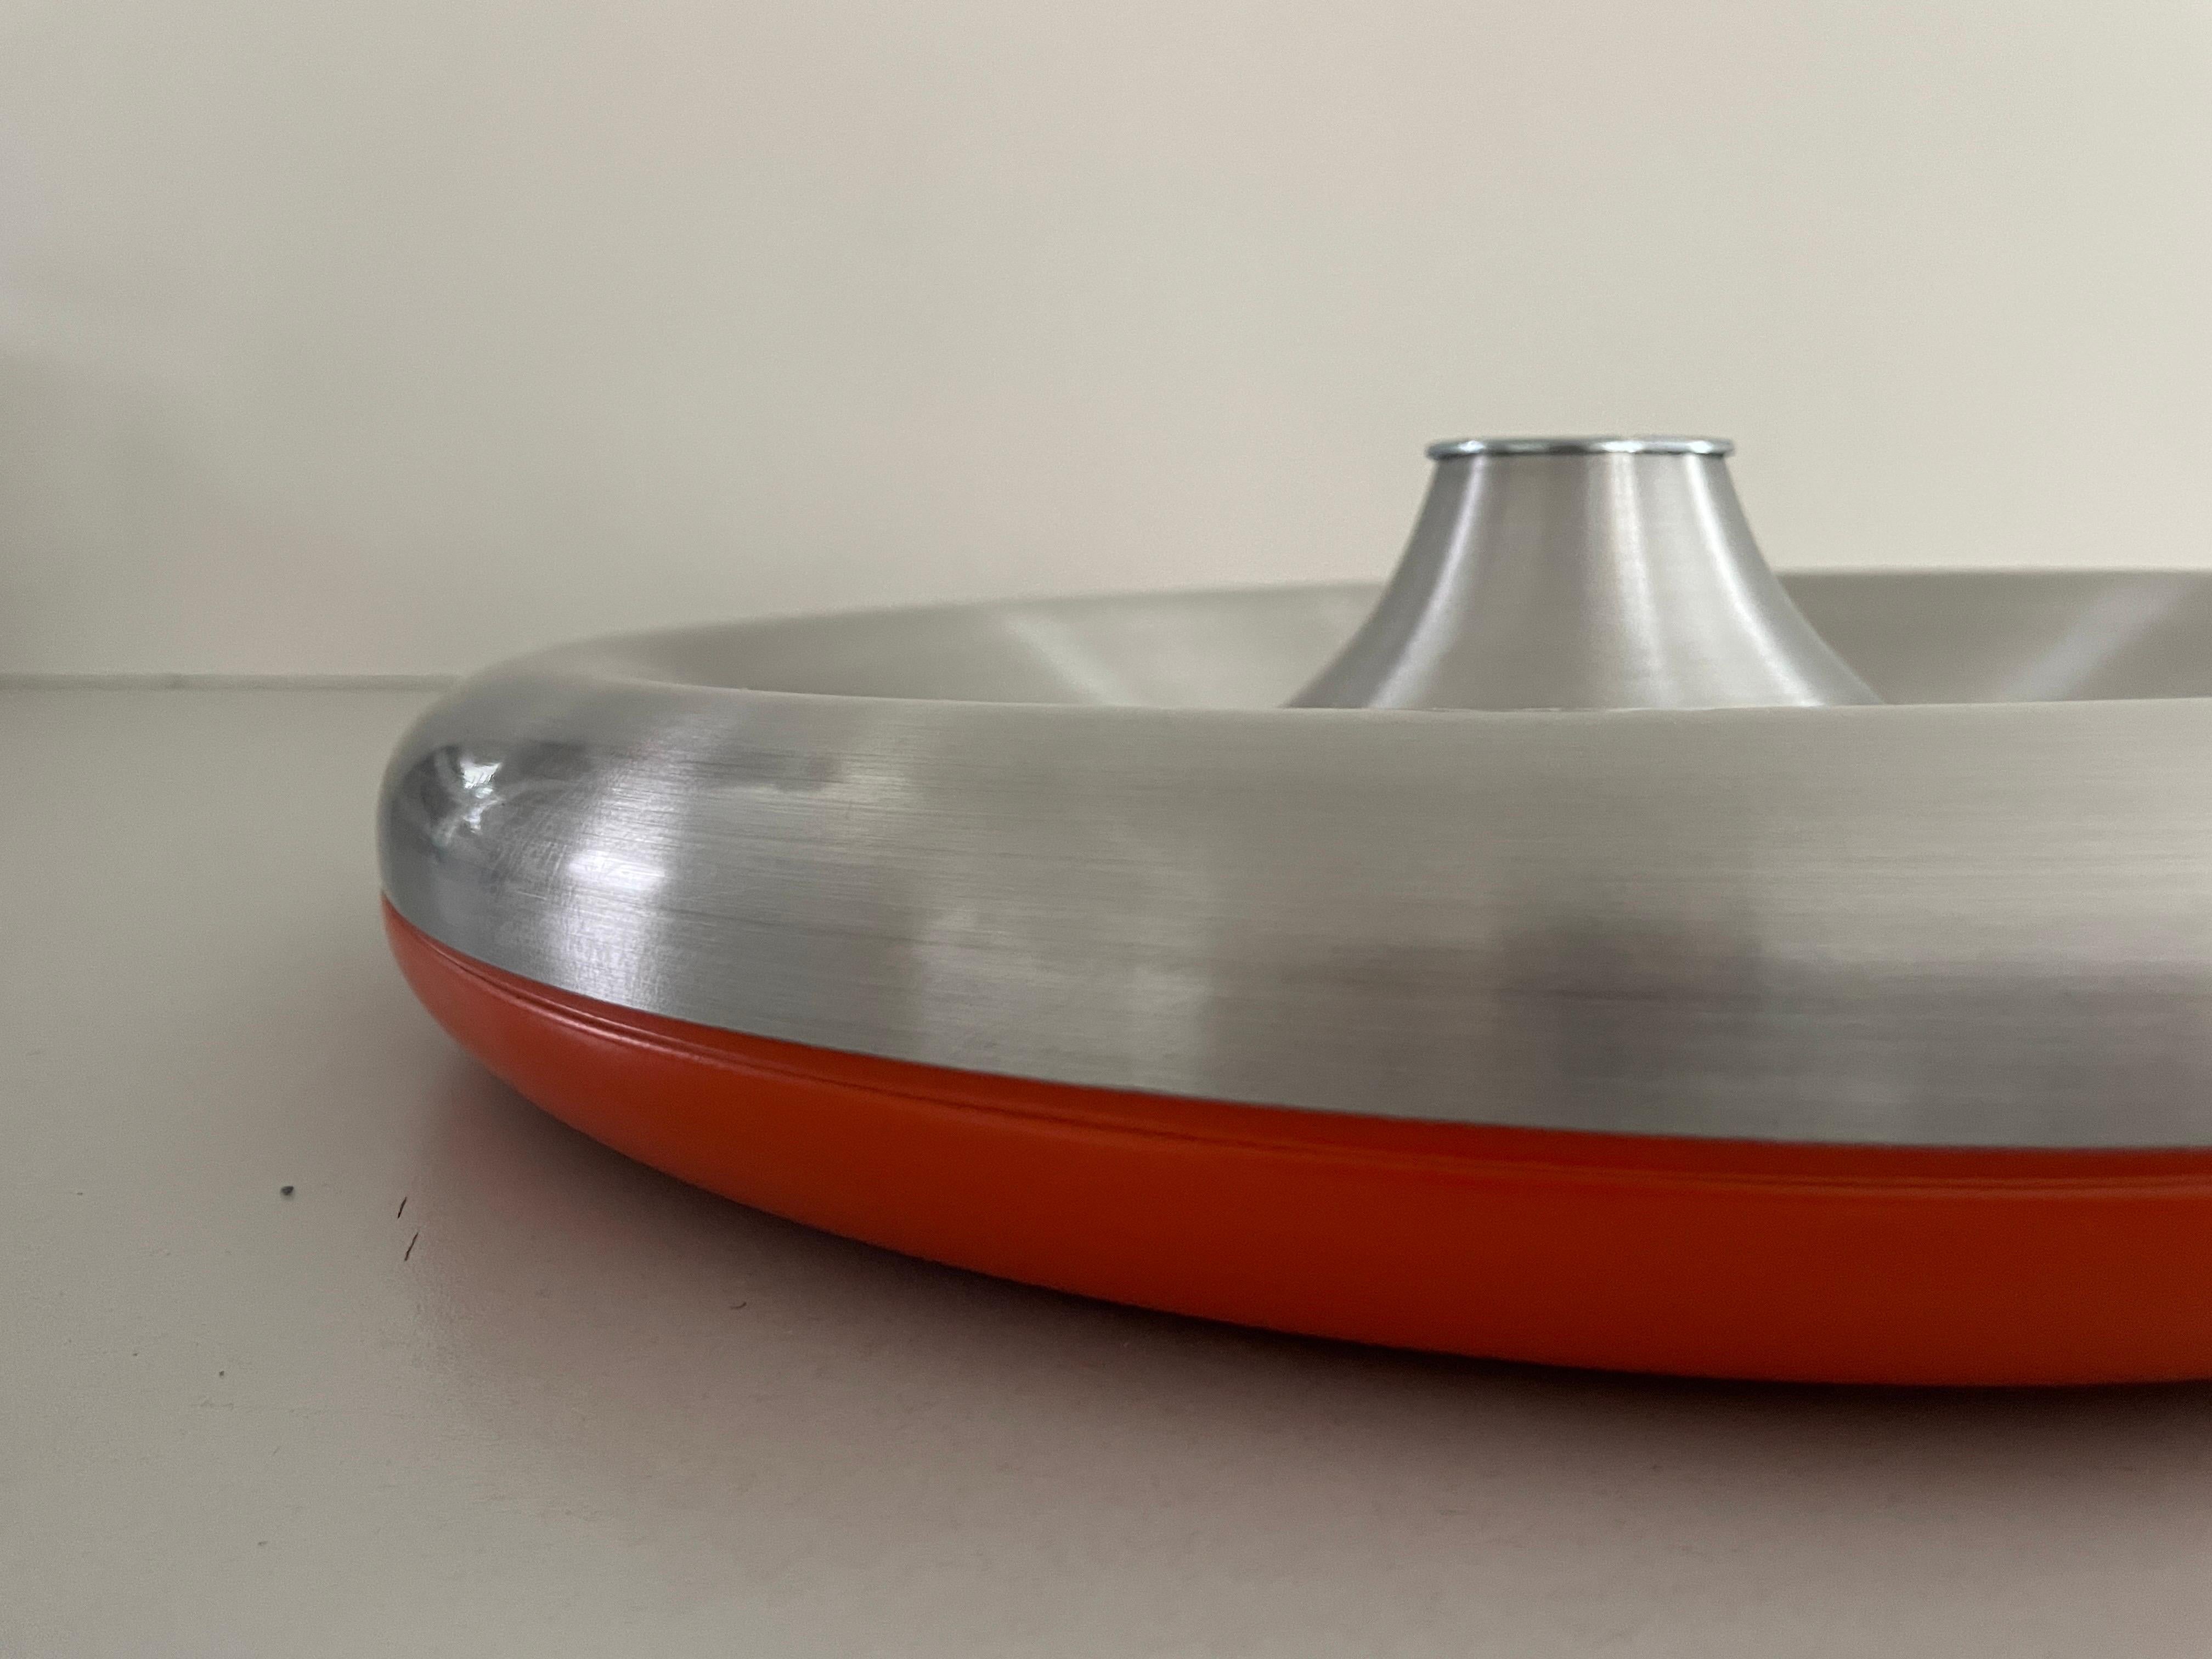 Metallic Grey and Orange Space Age Flush Mount Ceiling Lamp, 1970s, Germany For Sale 3